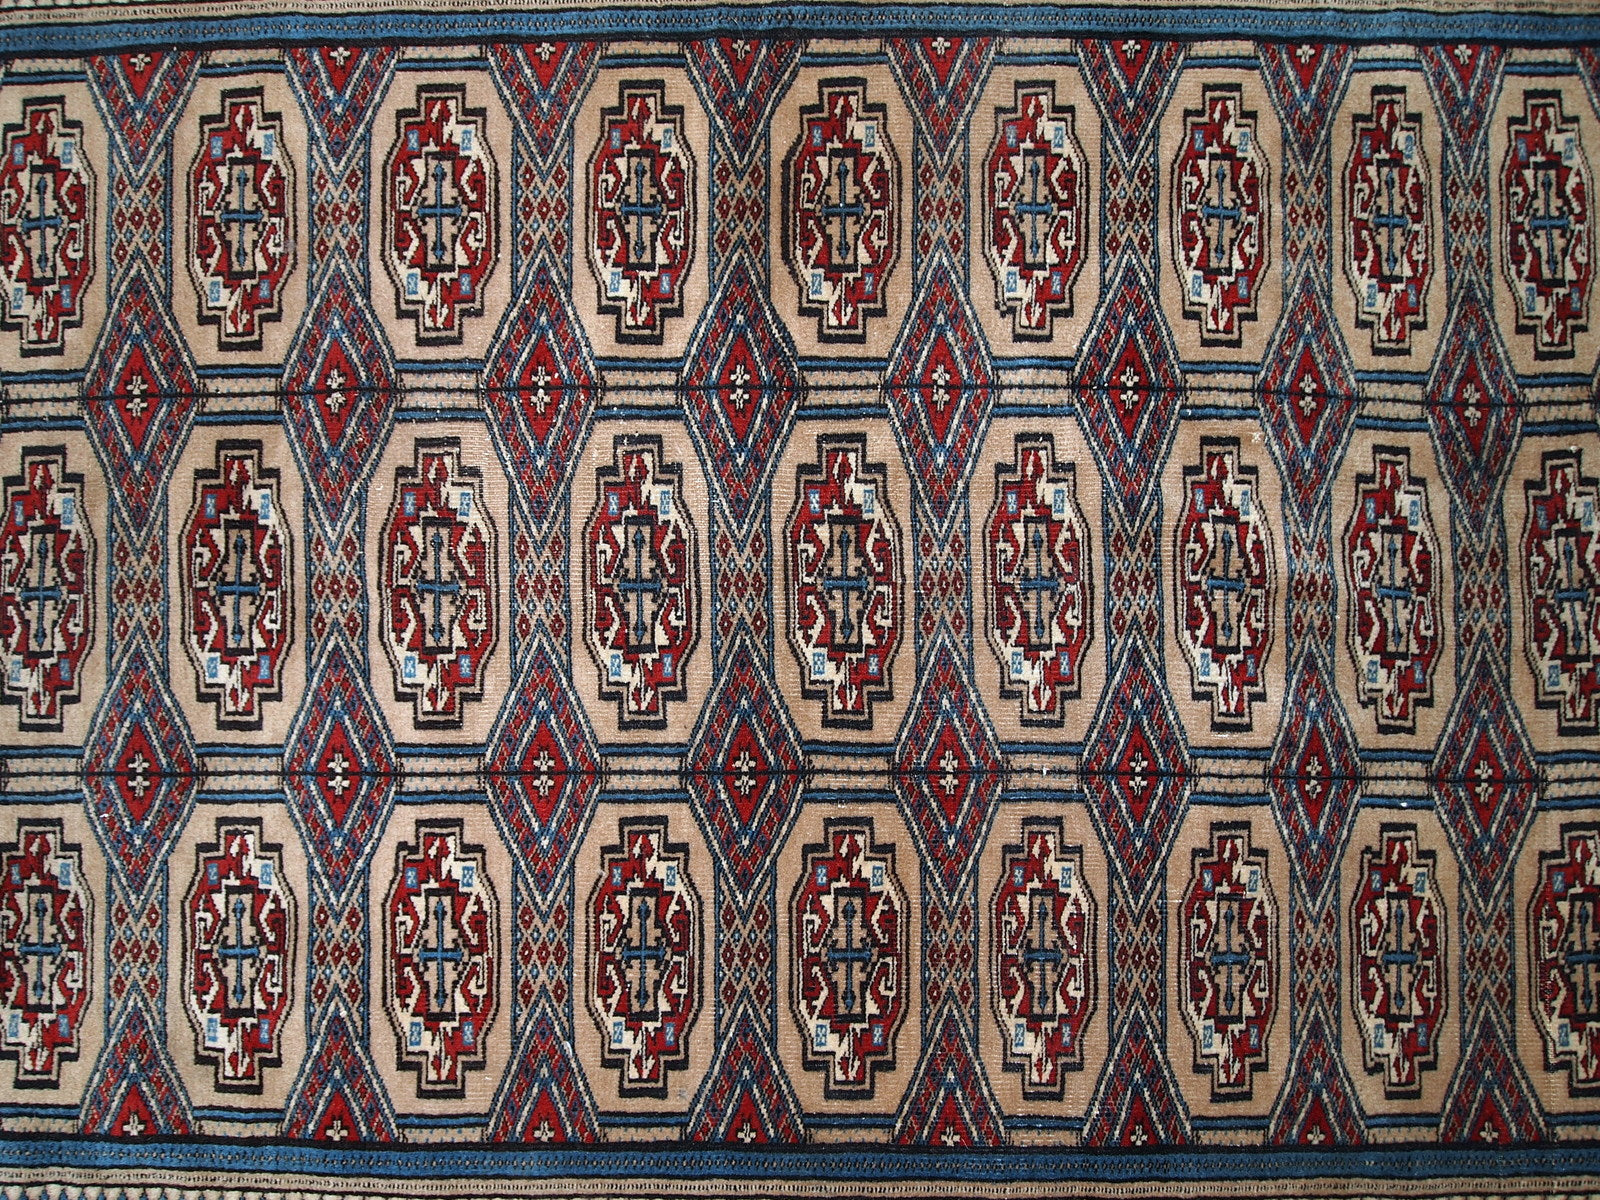 Handmade vintage Uzbek Bukhara rug in original good condition. The rug is from the middle of 20th century in brown and burgundy shades.